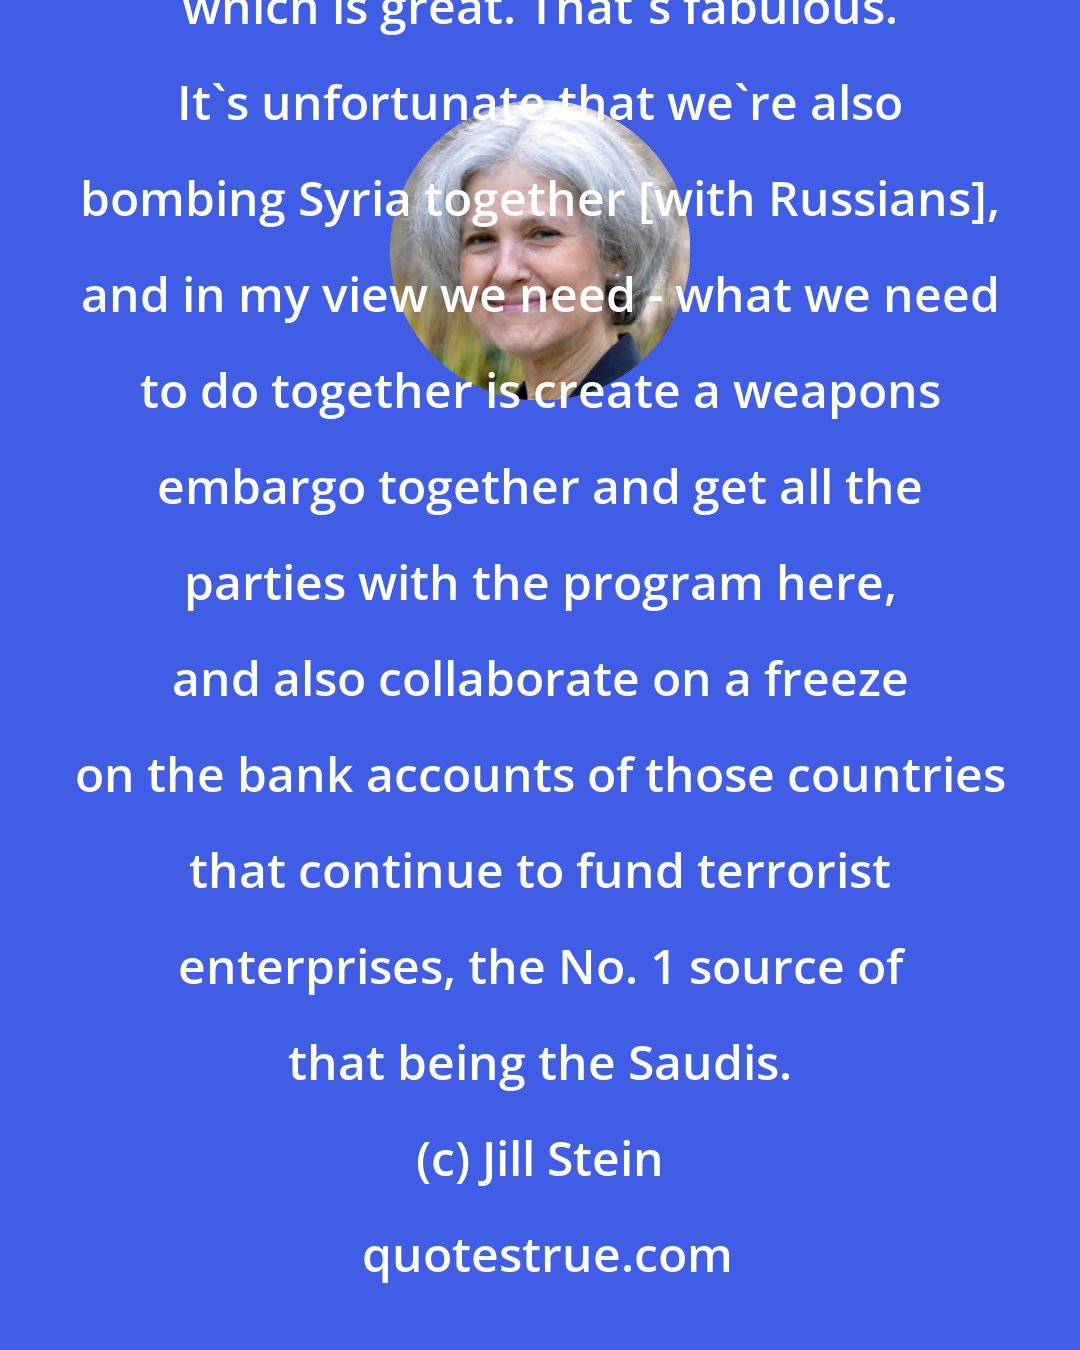 Jill Stein: We have a deal. And so there's movement towards a peace agreement, you know, a peace accord, a cease-fire, which is great. That's fabulous. It's unfortunate that we're also bombing Syria together [with Russians], and in my view we need - what we need to do together is create a weapons embargo together and get all the parties with the program here, and also collaborate on a freeze on the bank accounts of those countries that continue to fund terrorist enterprises, the No. 1 source of that being the Saudis.